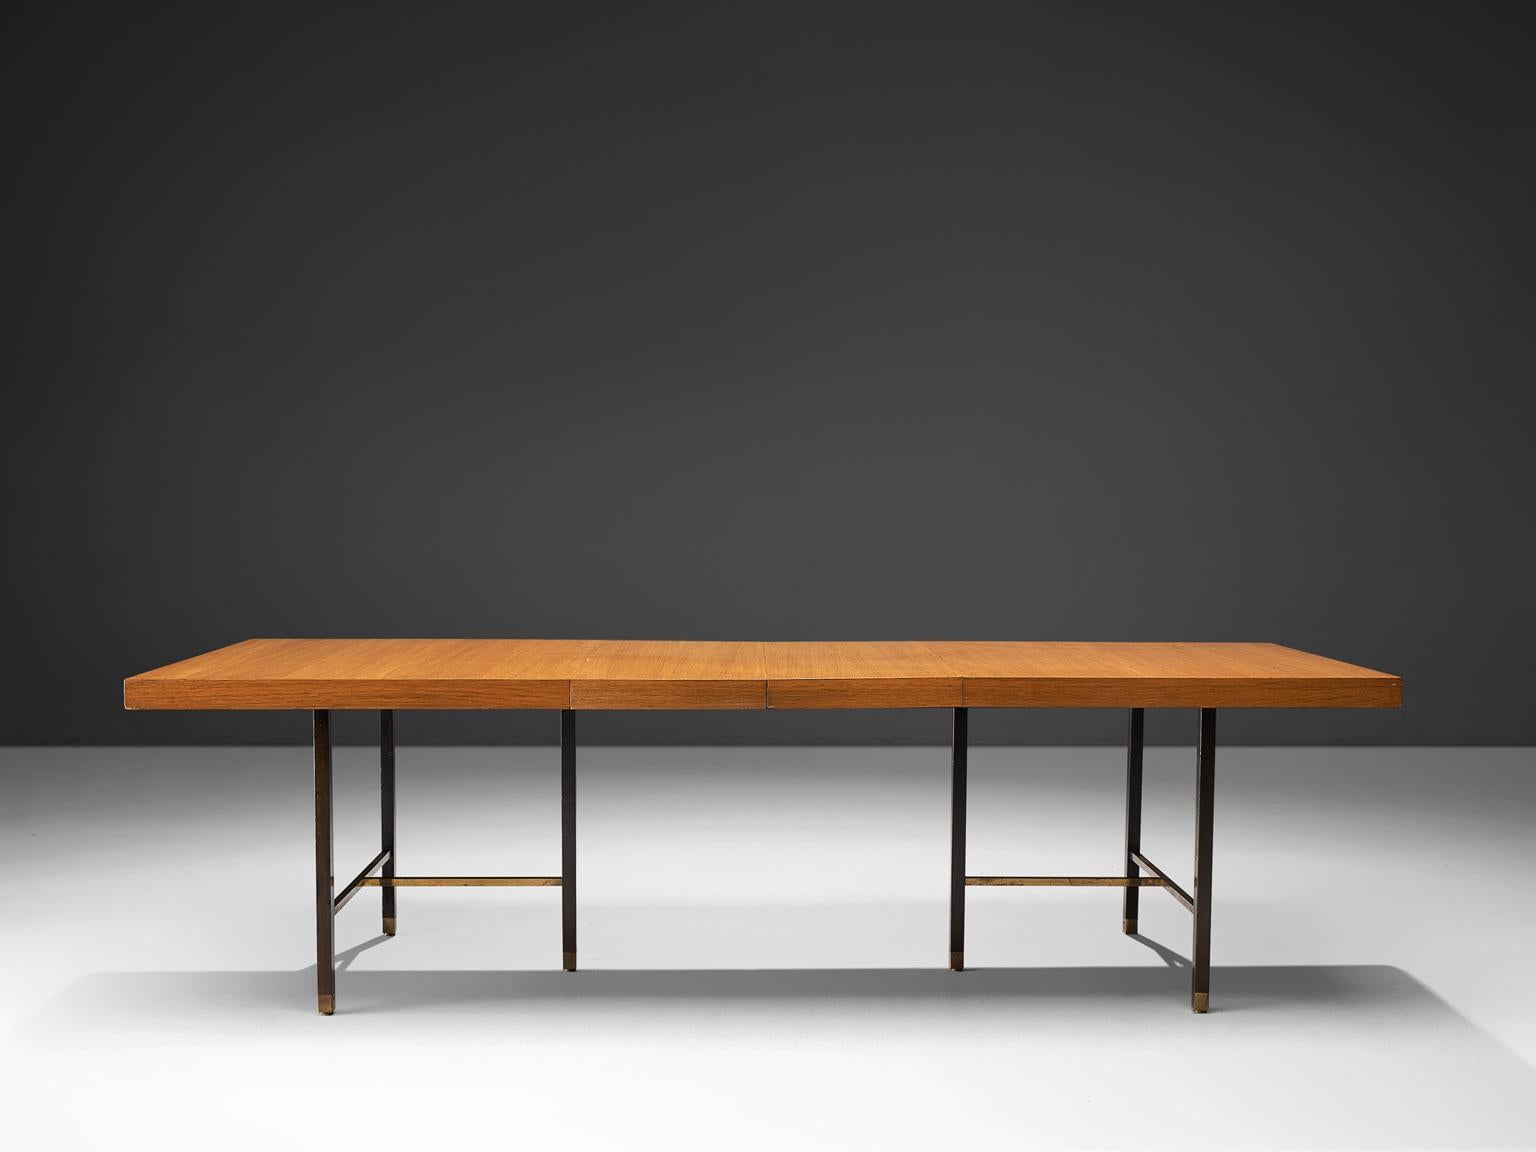 Harvey Probber Inc., mahogany and stained mahogany for the legs, brass, USA, circa 1955.

This Minimalist, modest table is designed by Harvey Probber. The top, executed in warm mahogany forms a striking balance with the dark stained legs and the